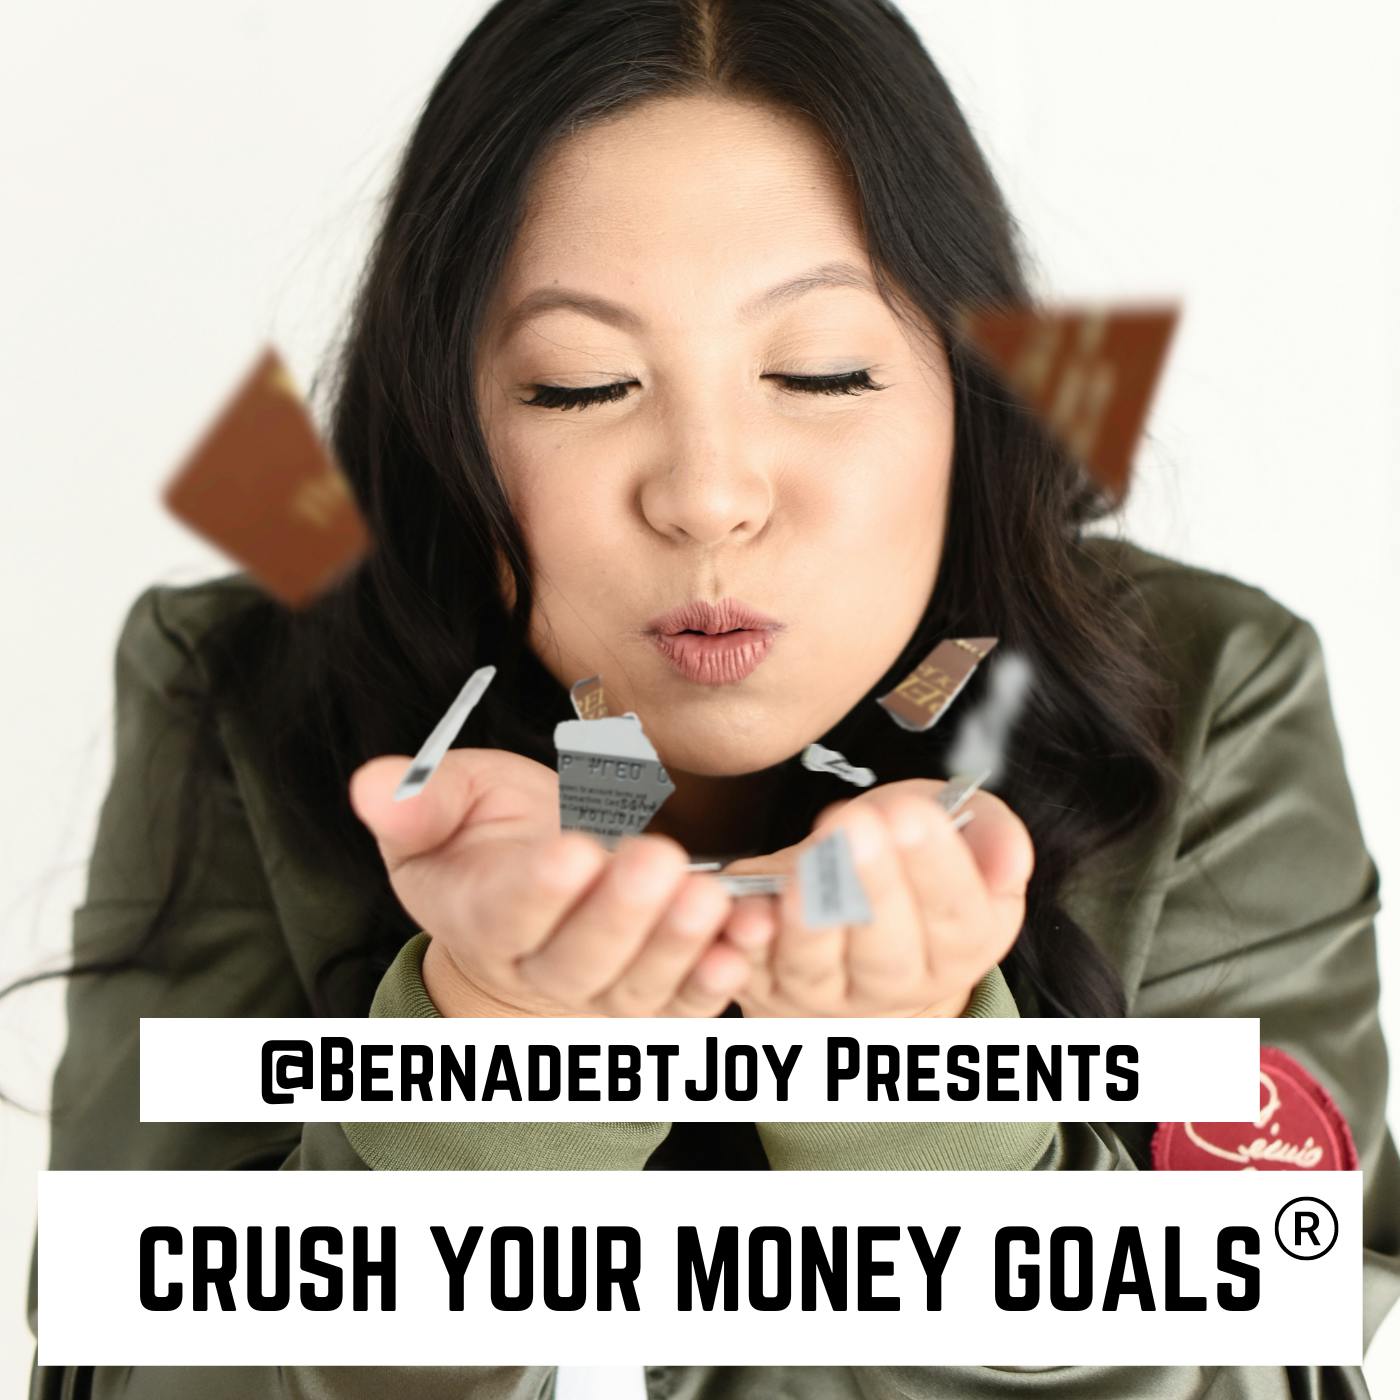 Four truths you need to hear about your money goals (from a debt free millennial millionaire)